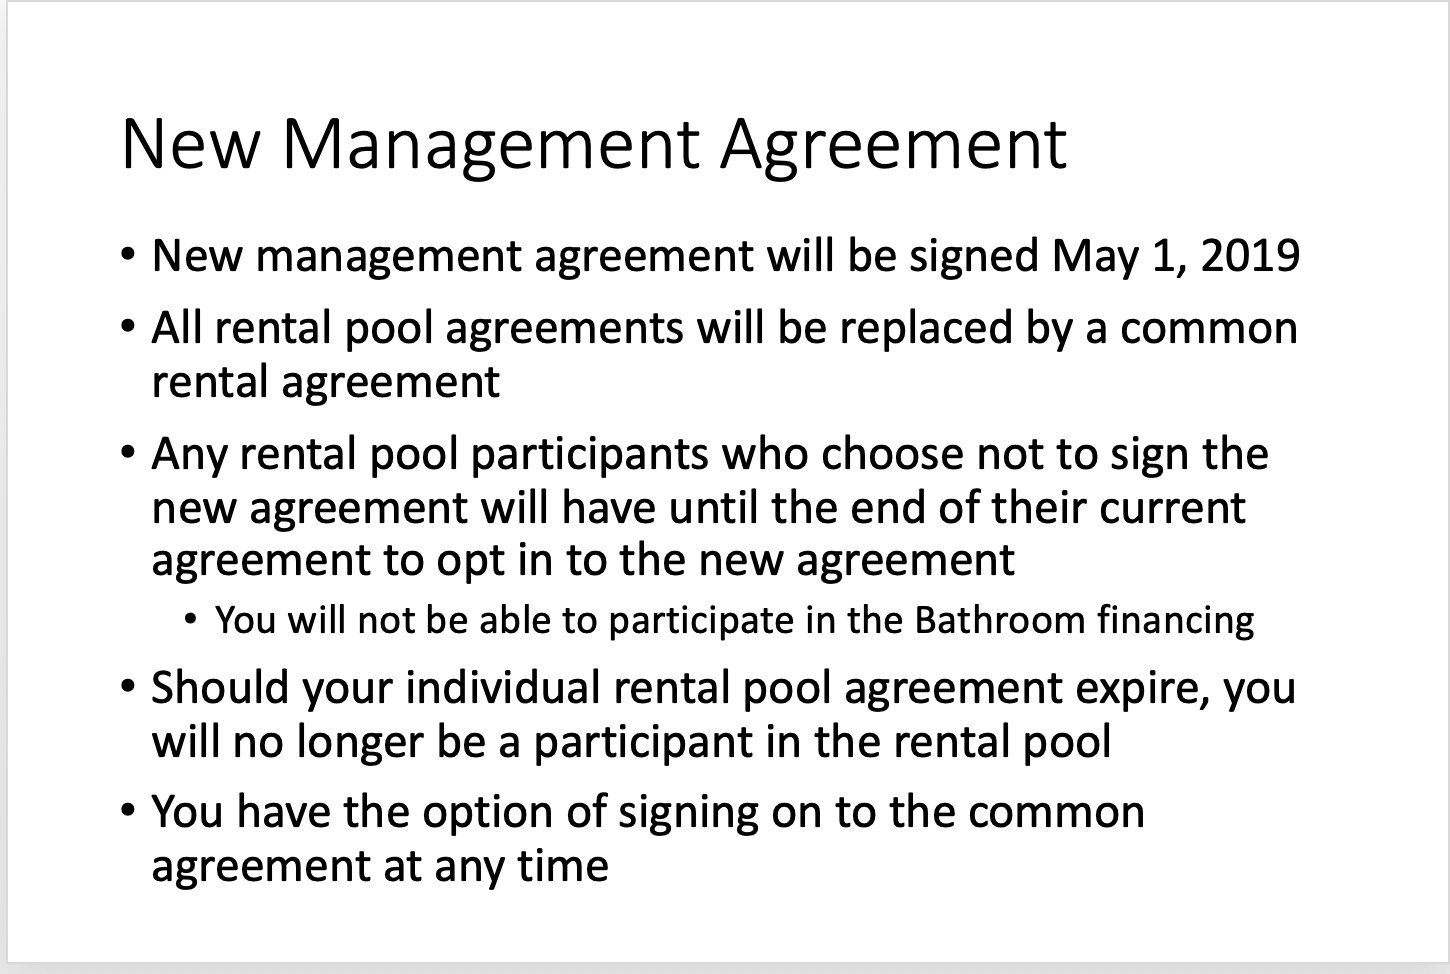 We will be asking all participants in the rental pool to sign the new agreement in May of 2019
If a rental pool participant chooses not to sign the new agreement they continue to participate in the rental pool until their current agreement expires (which for everyone is over the course of the next year)
If you are not signing the new agreement you will not be able to participate in the financing of the new bathrooms since we would have no legal oversight of your units
